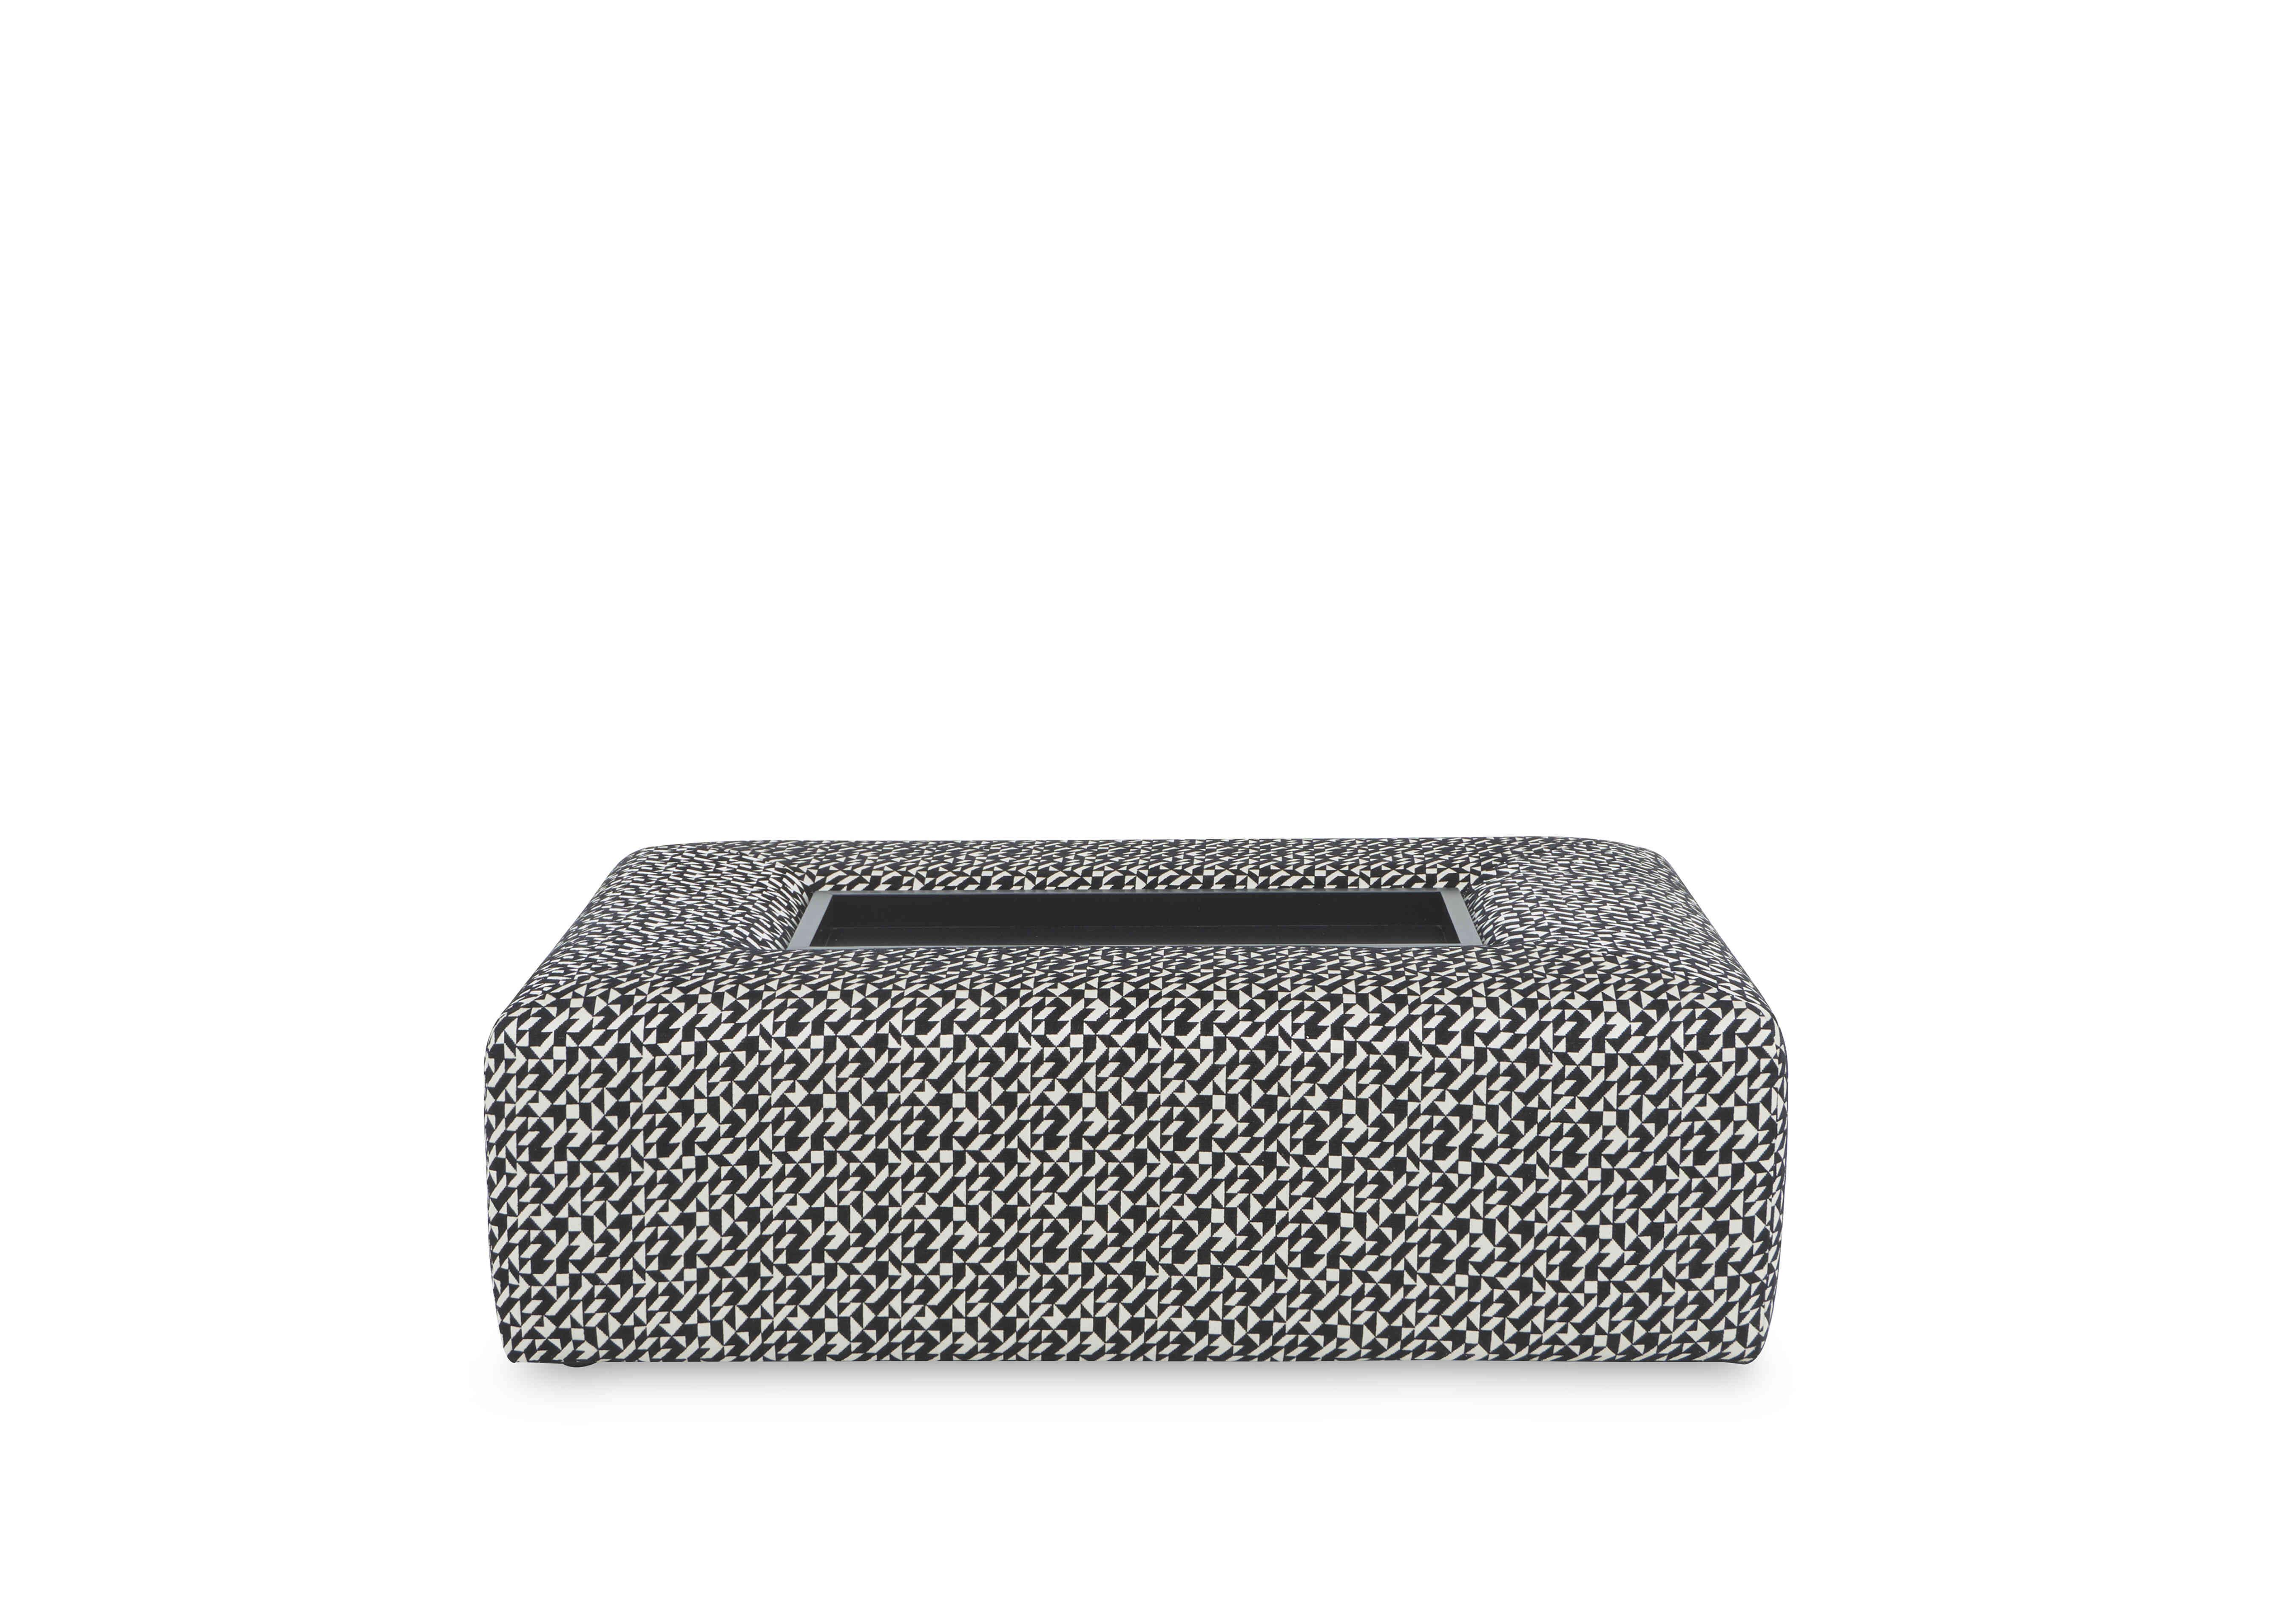 Celine Rectangular Footstool with Wooden Tray in Tangram Monochrome Eb Sp on Furniture Village